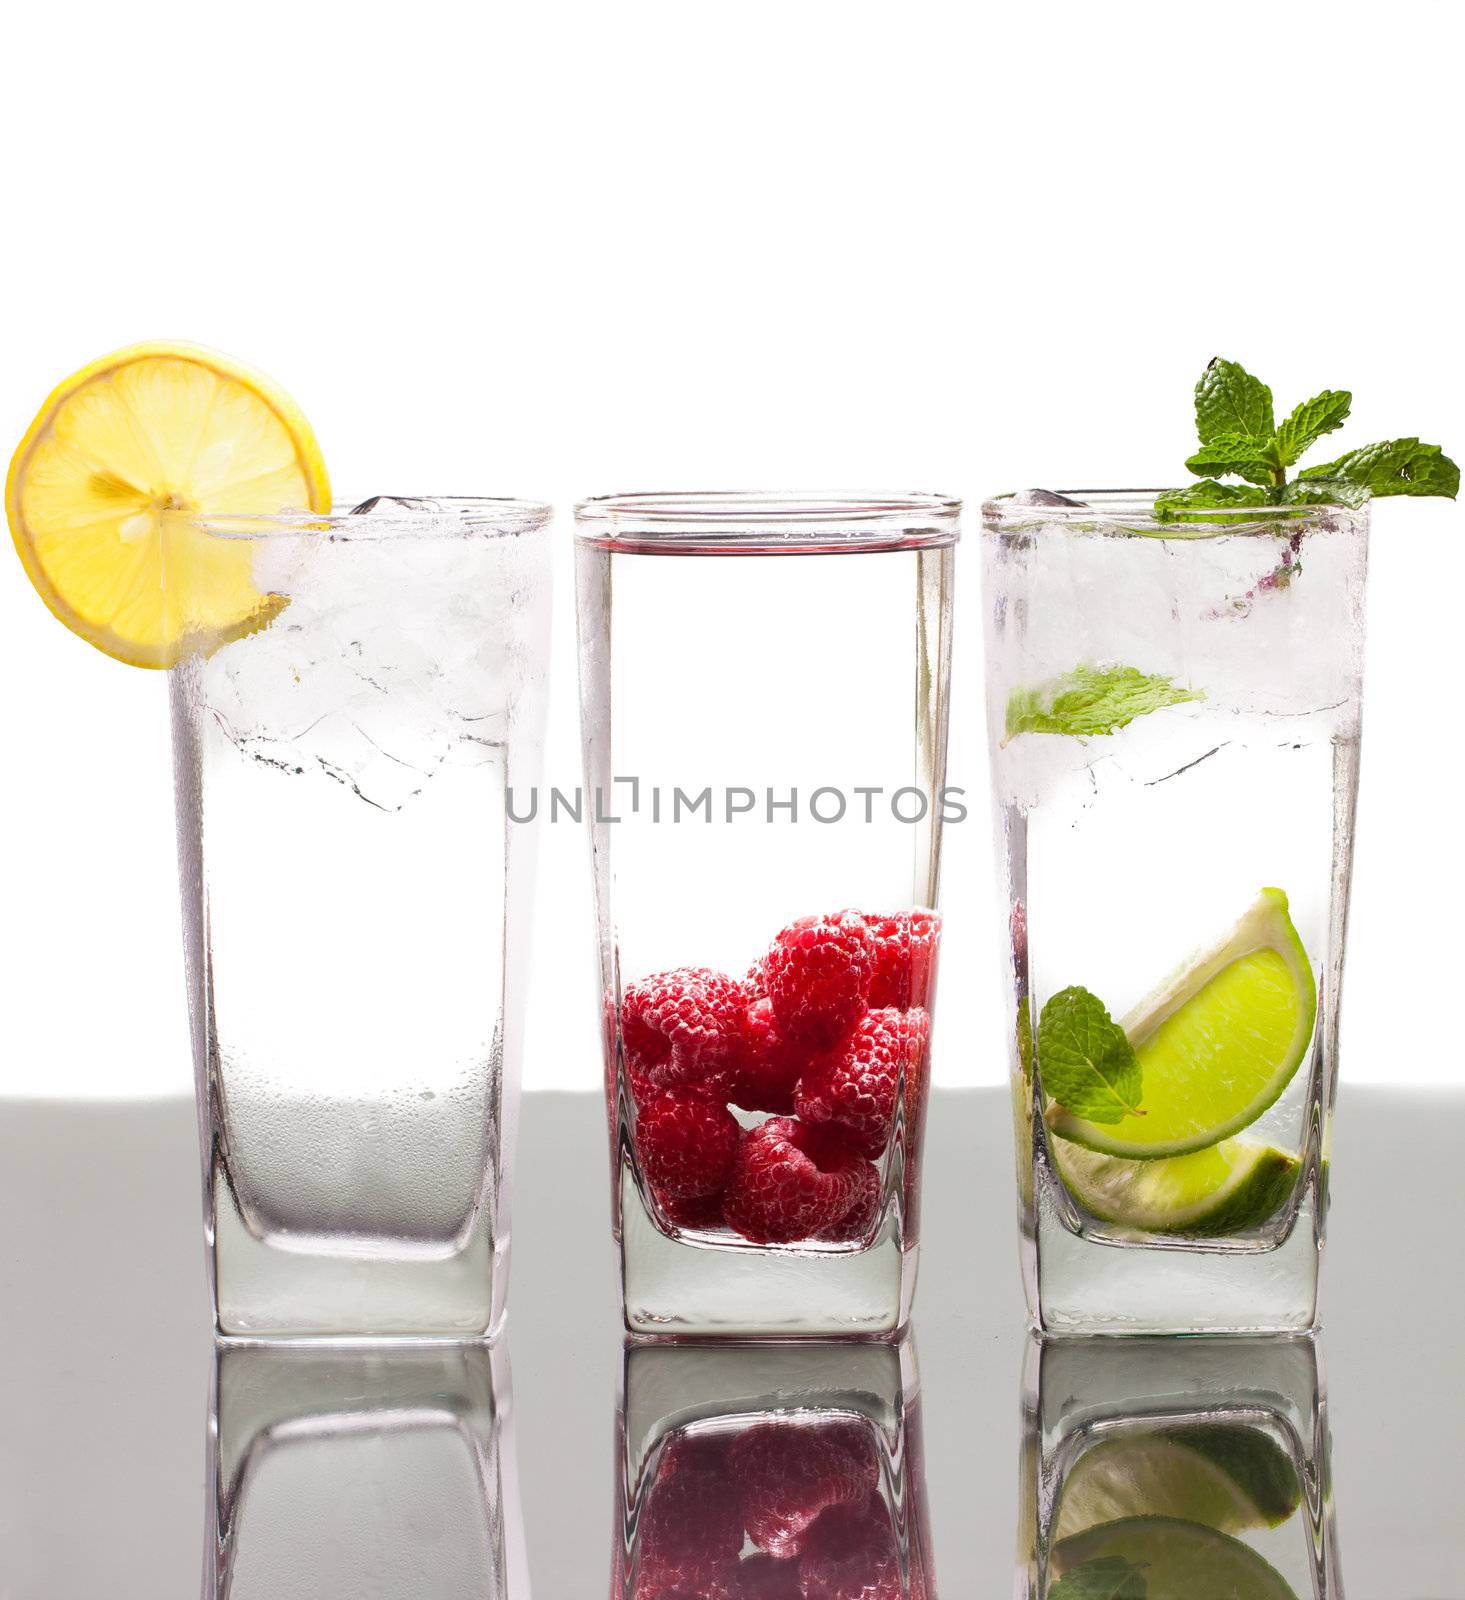 Three colorful alcoholic drinks with berries, fruit and ice. On a table with reflection and isolated over white.